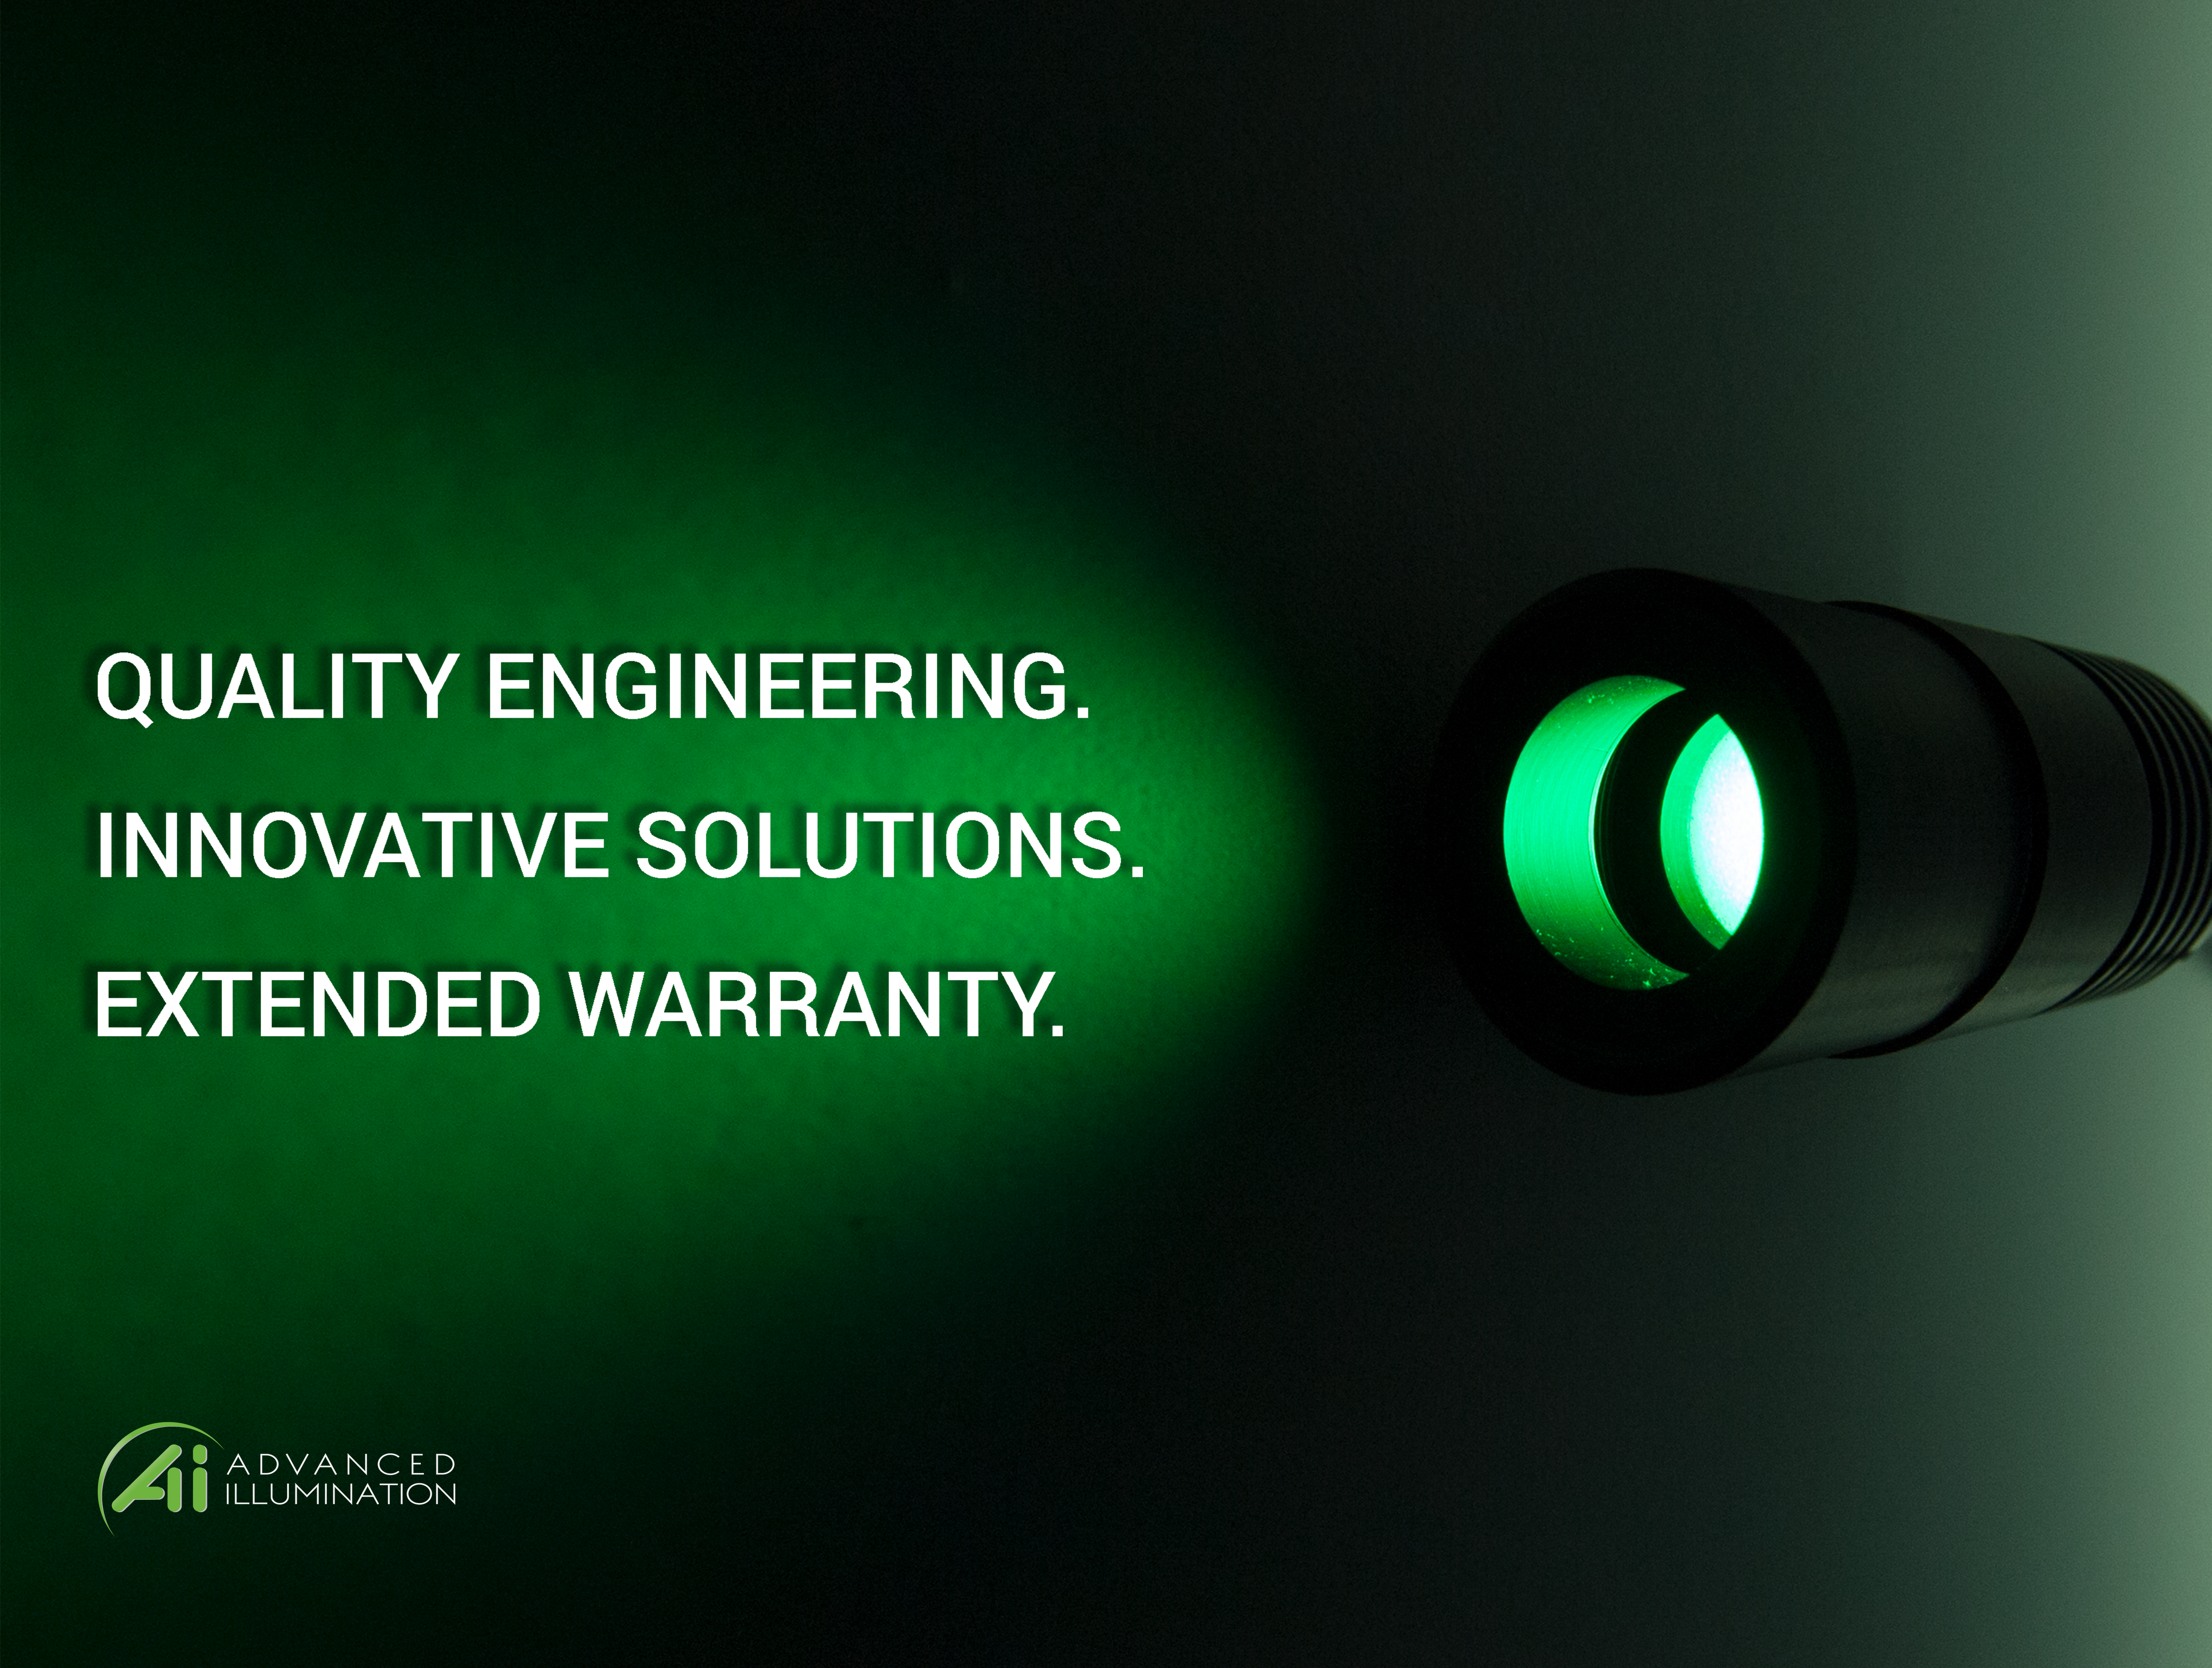 quality engineering, innovative solutions, and an extended warranty from Advanced illumination